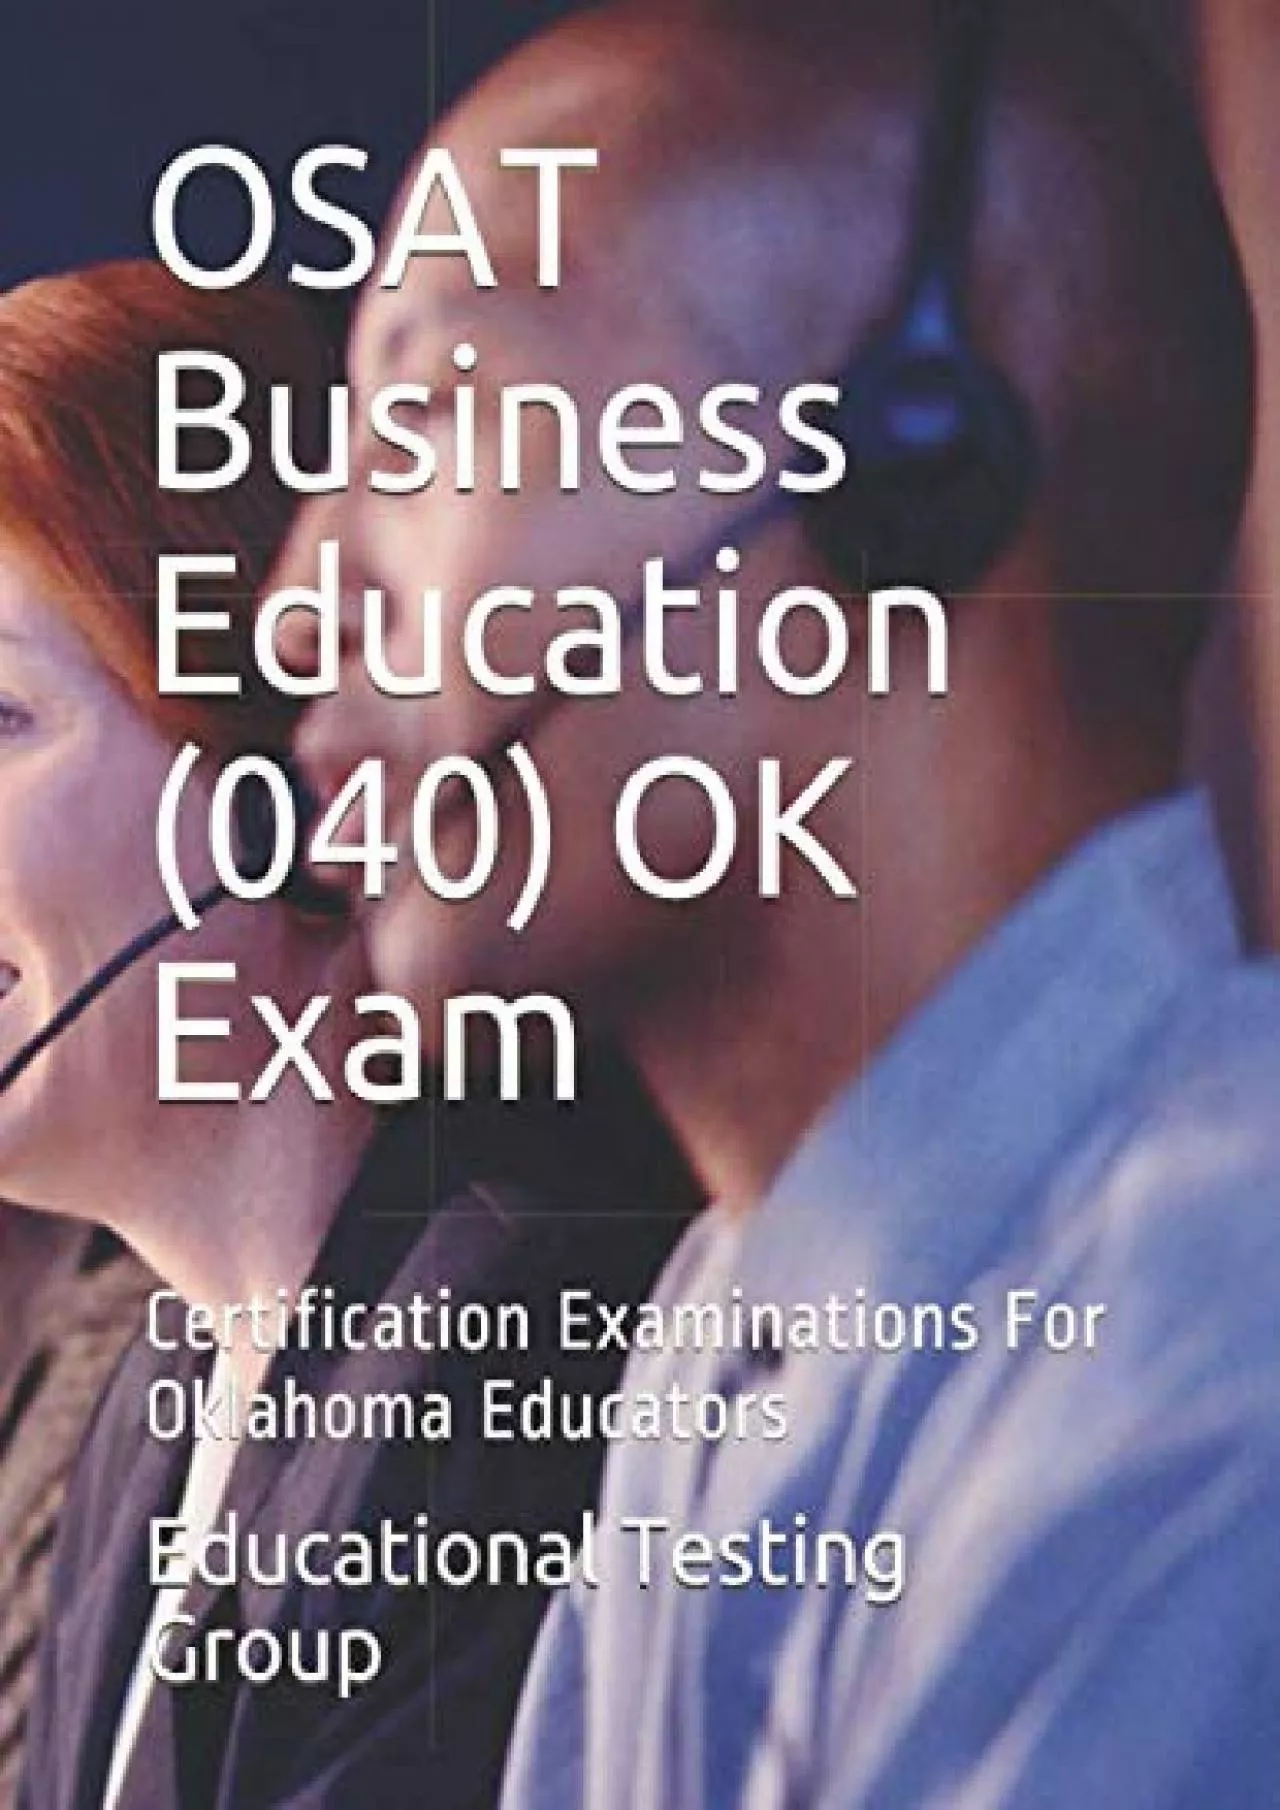 [DOWNLOAD] OSAT Business Education 040 OK Exam: Certification Examinations For Oklahoma